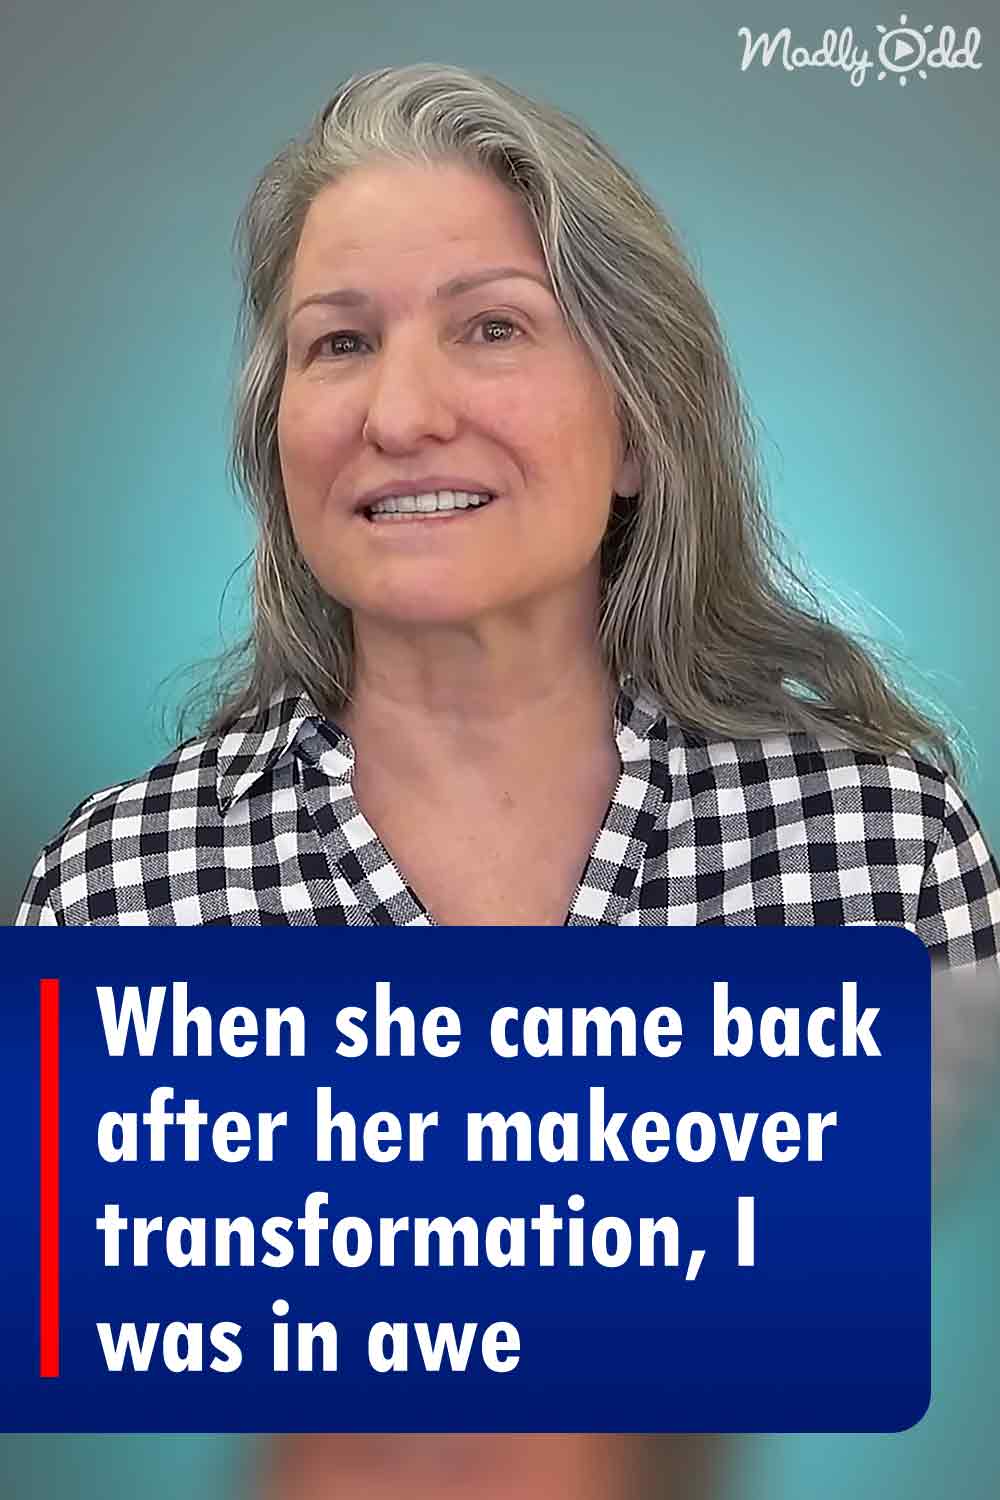 When she came back after her makeover transformation, I was in awe